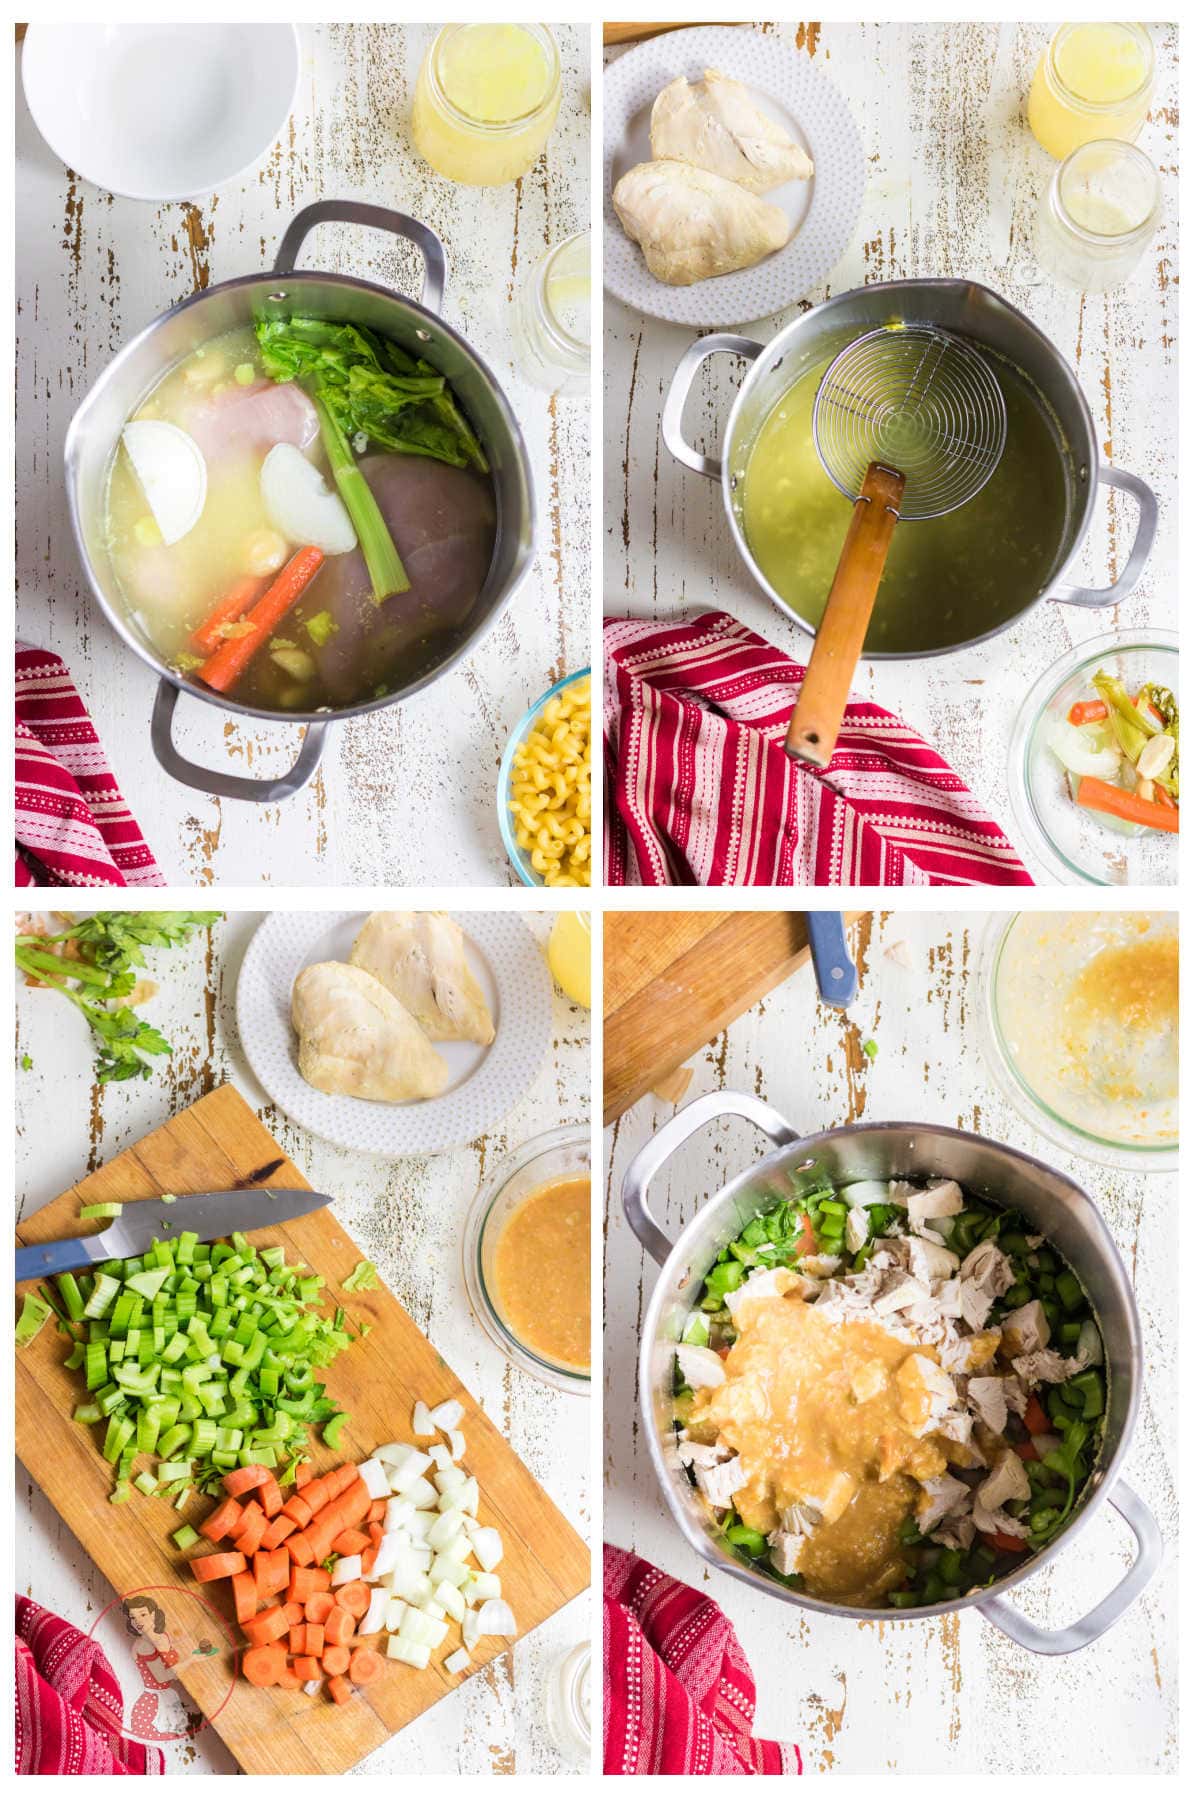 Step by step images showing how to make chicken noodle soup.